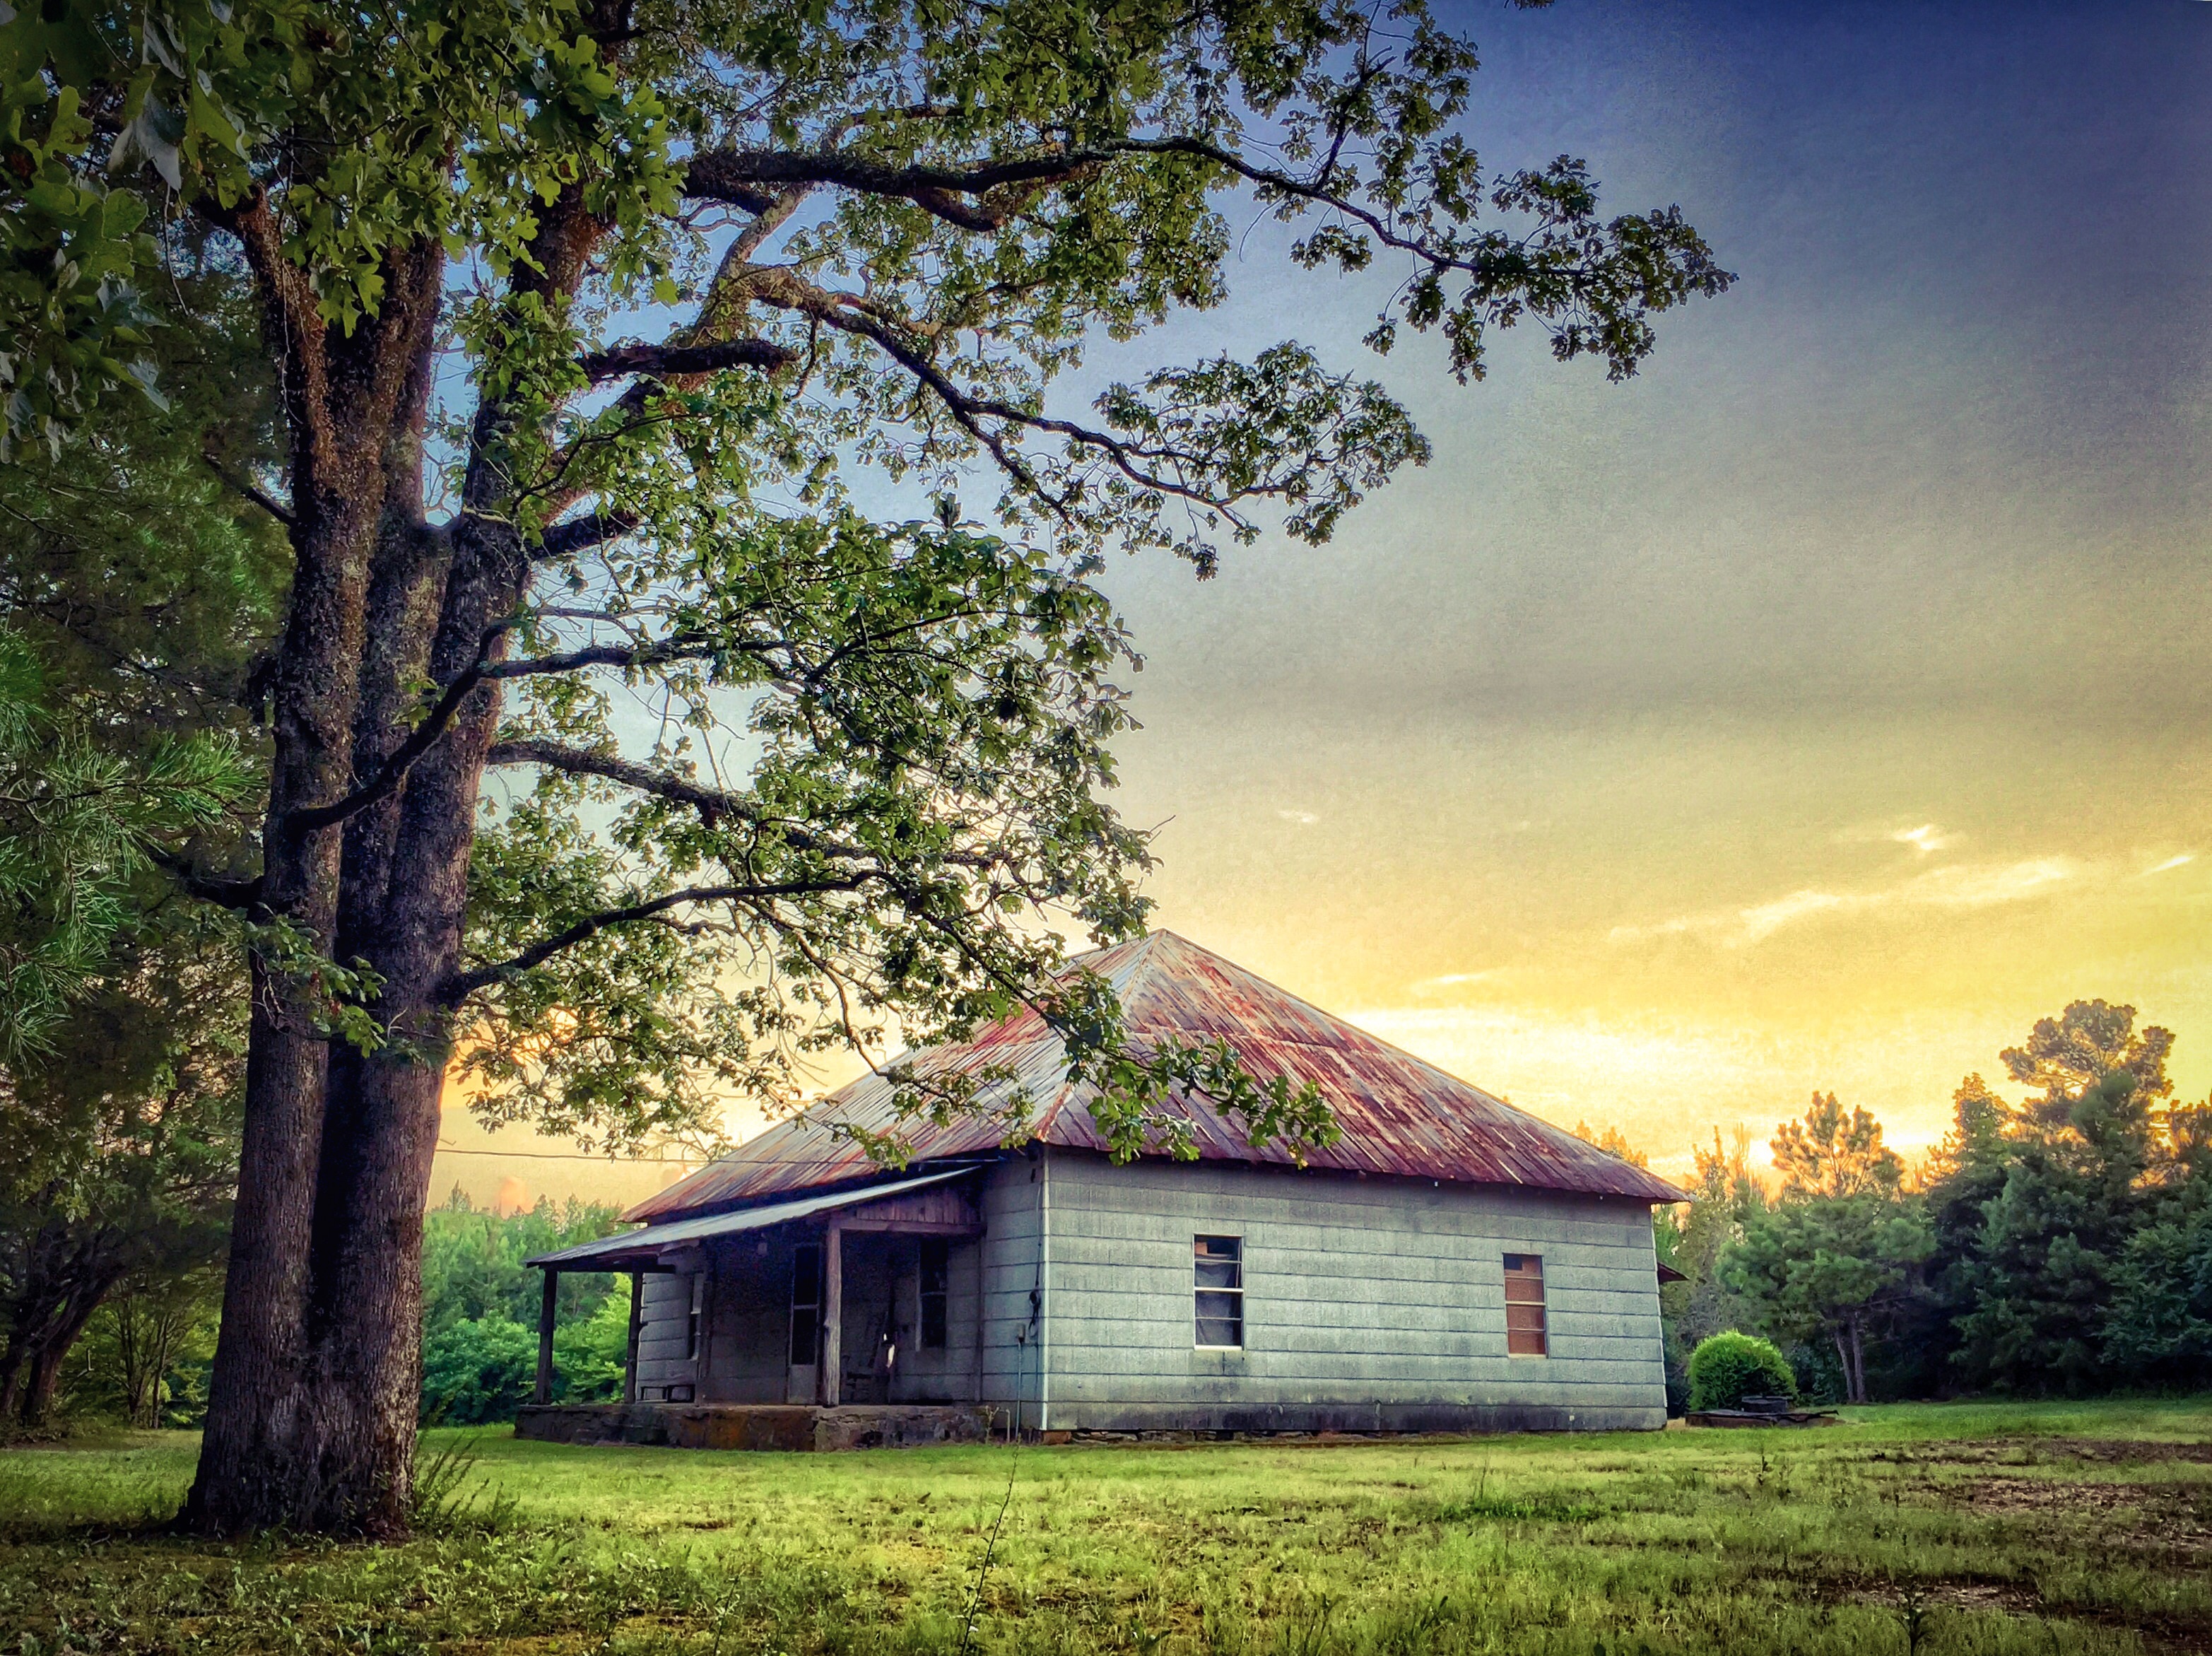 trees, house with wooden roof, HDR, colorful sky,rural farm